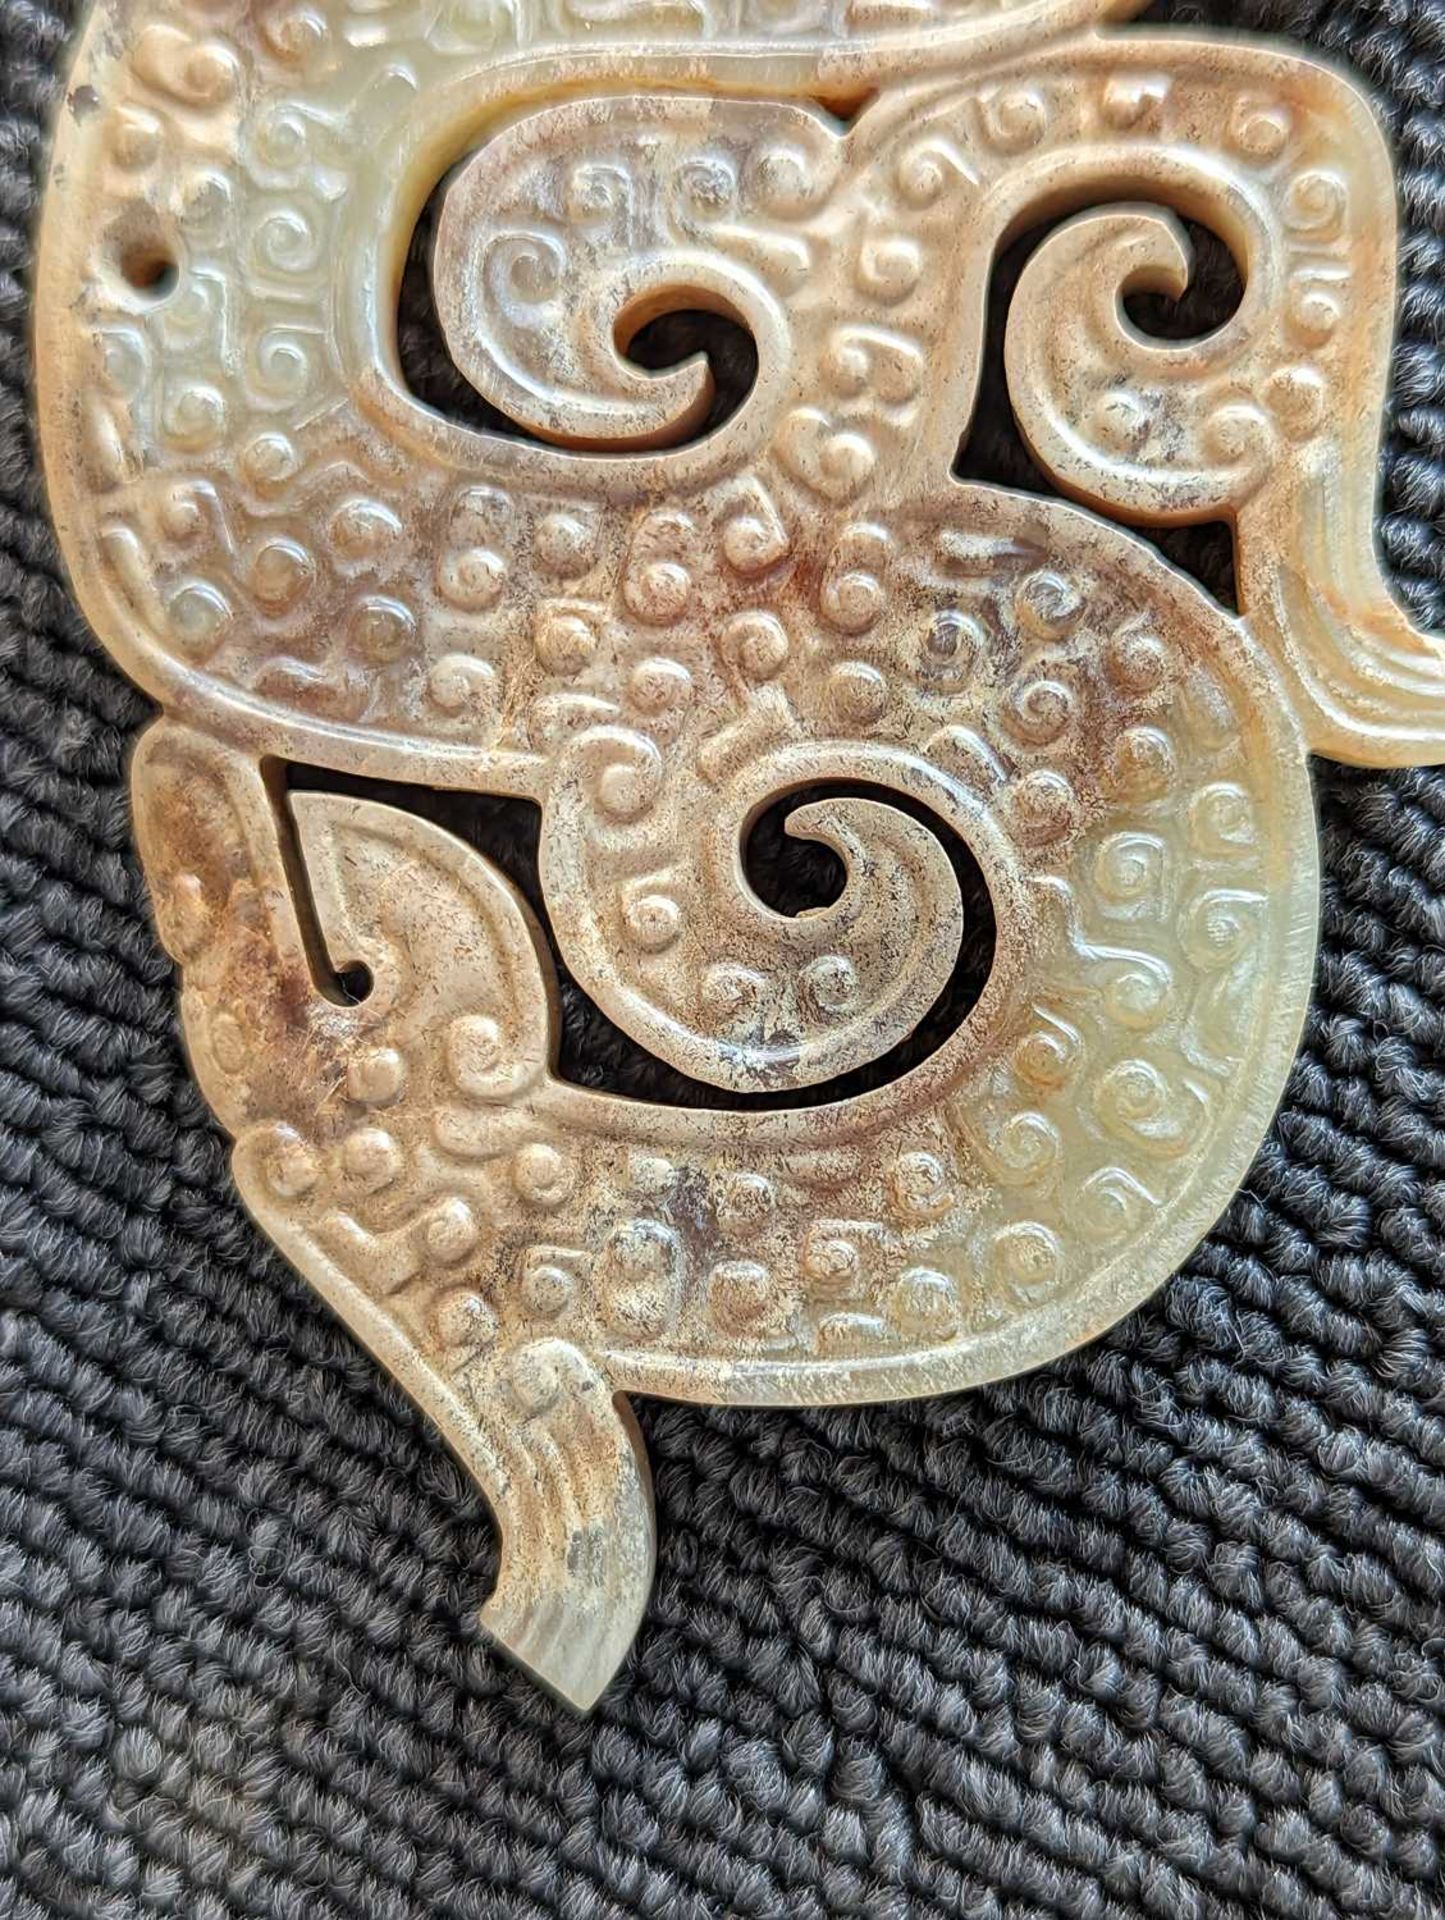 DRAGON-SHAPED PENDANT WITH CIRRUS CLOUD STRIPES - Image 2 of 25